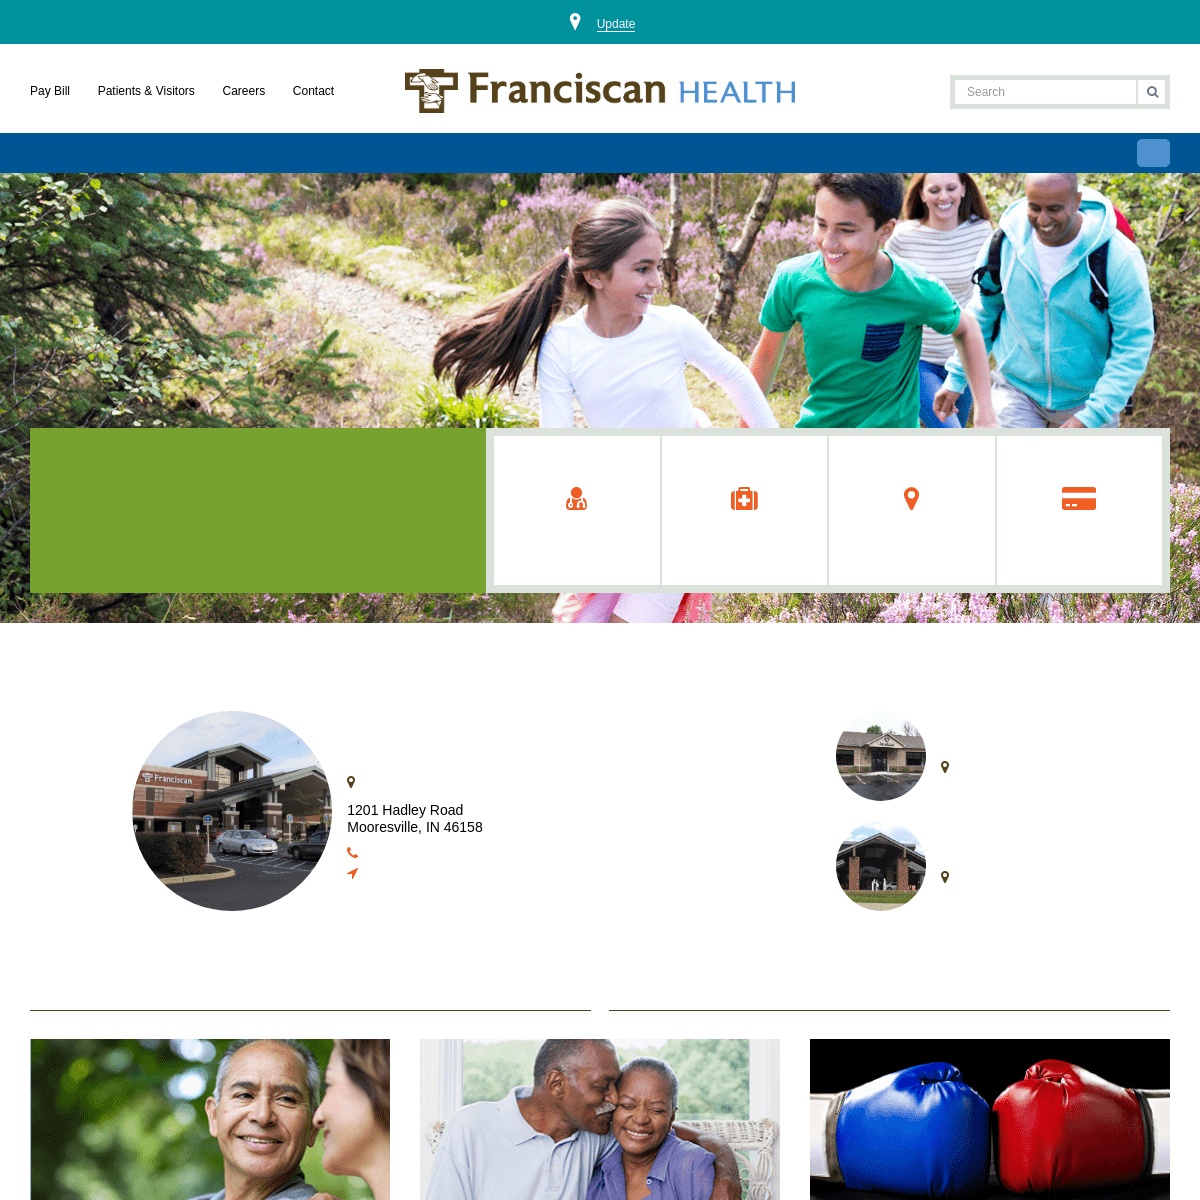 A complete backup of franciscanhealth.org